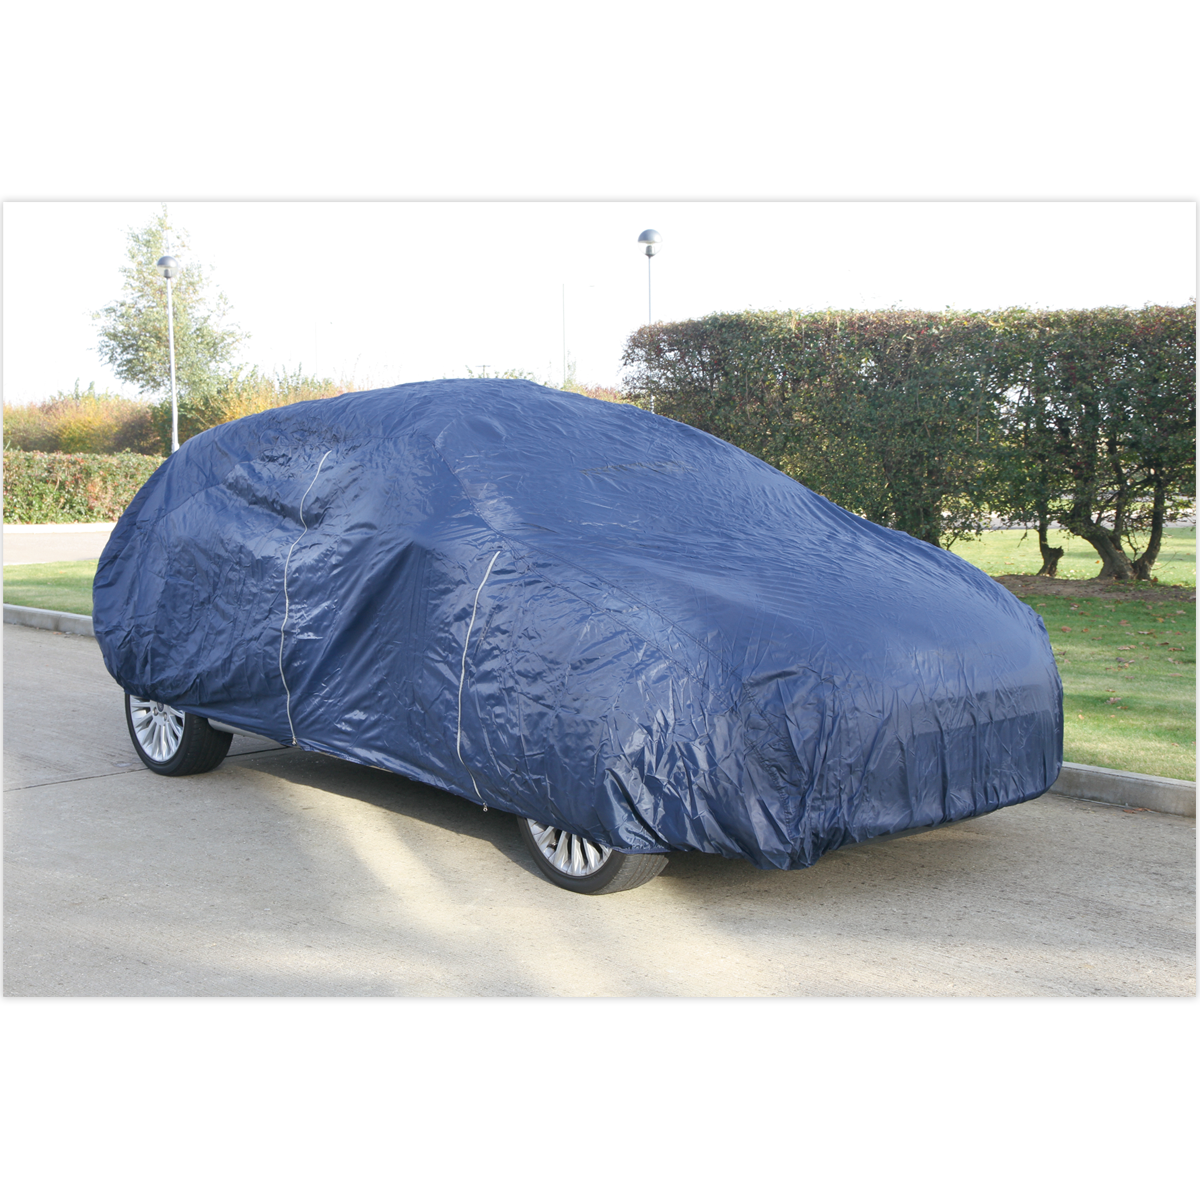 Car Cover Lightweight X-Large 4830 x 1780 x 1220mm - CCEXL - Farming Parts